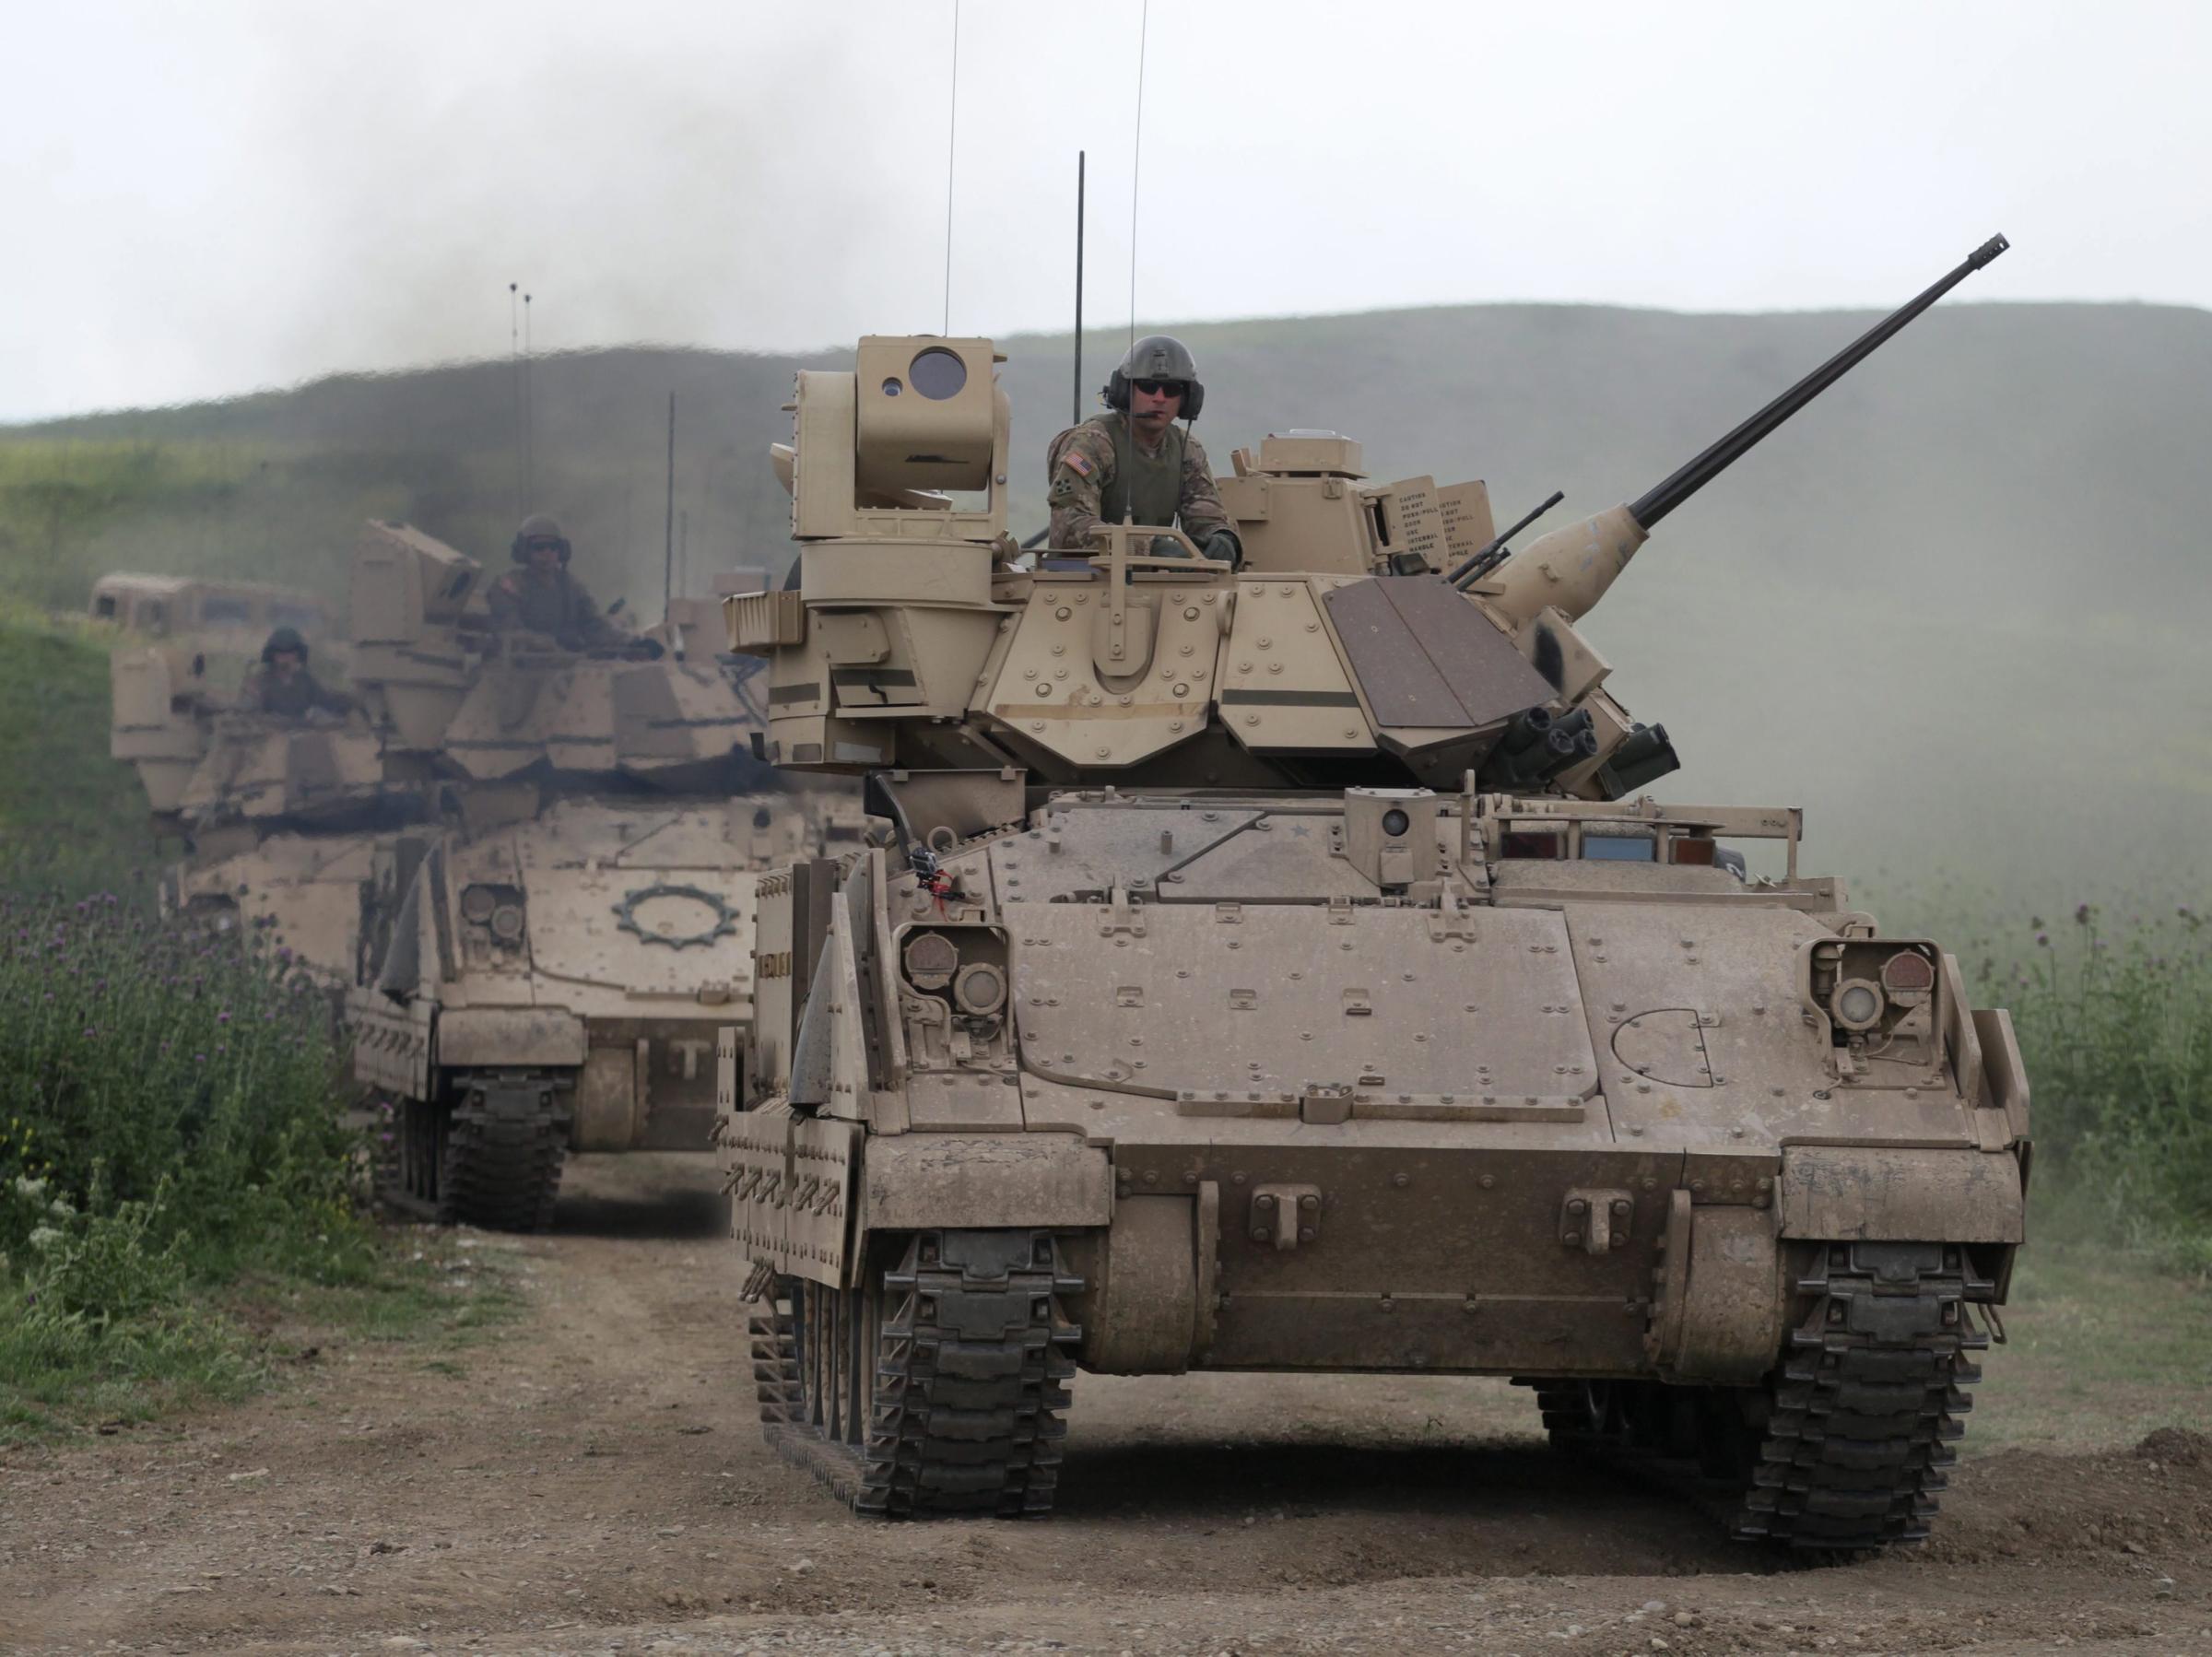 U.S. Bradley fighting vehicles take part in a joint exercise with Georgia at a military base near Tbilisi. Bradleys would be deployed to NATO member states in Eastern Europe and the Baltics if a Pentagon proposal is approved.